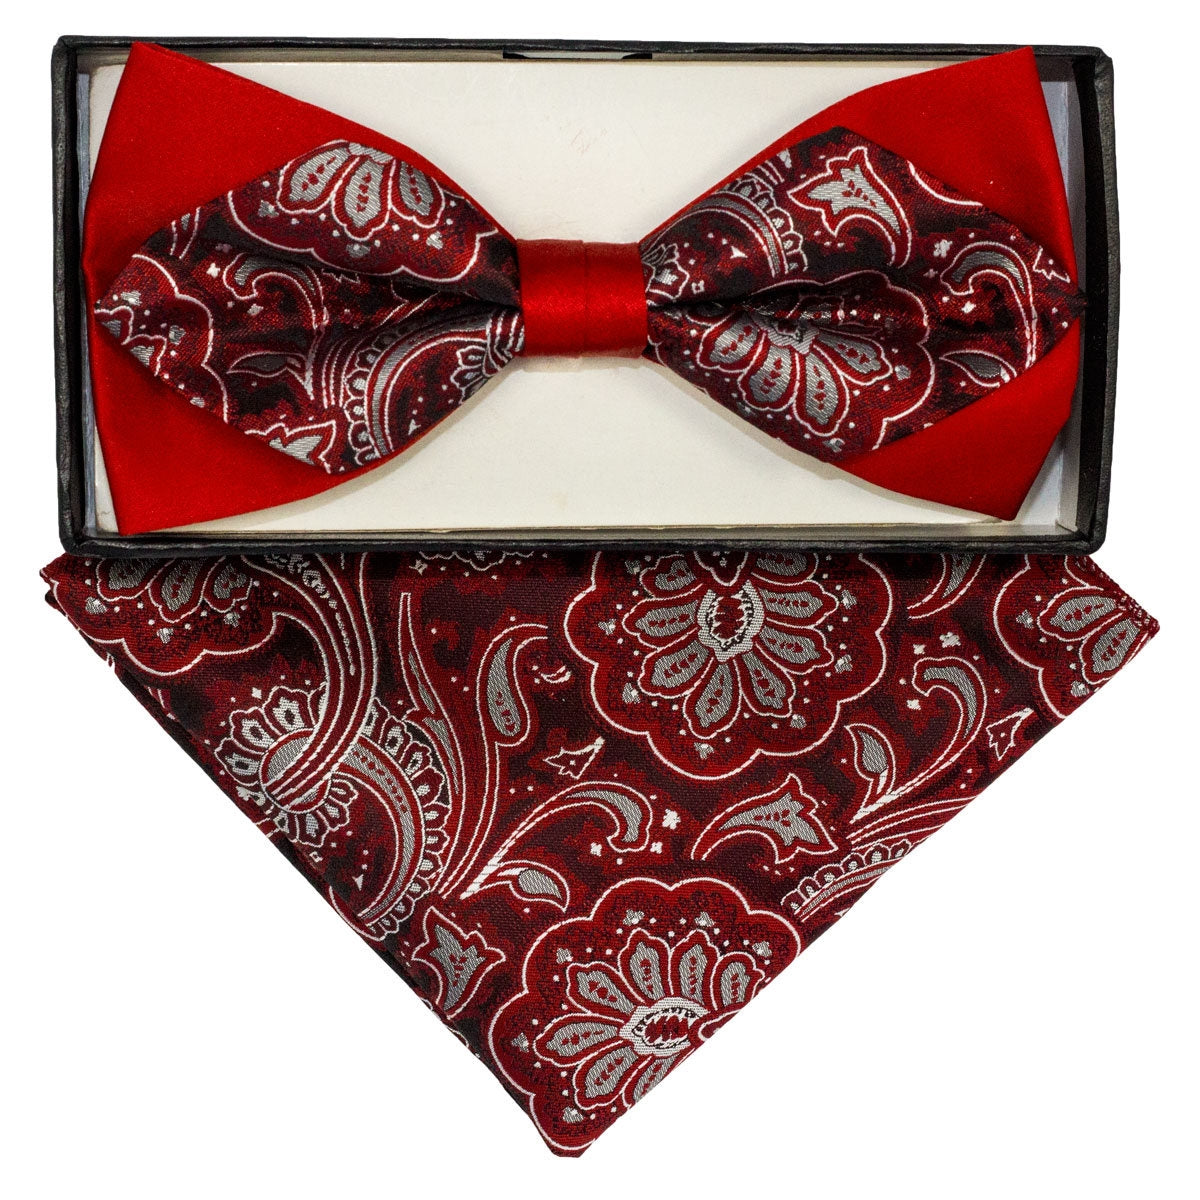 Men's Red Paisley Diamond Pre Tied Bow Tie + Hanky BD-157 Neck Tie TheDapperTie Red One Size 